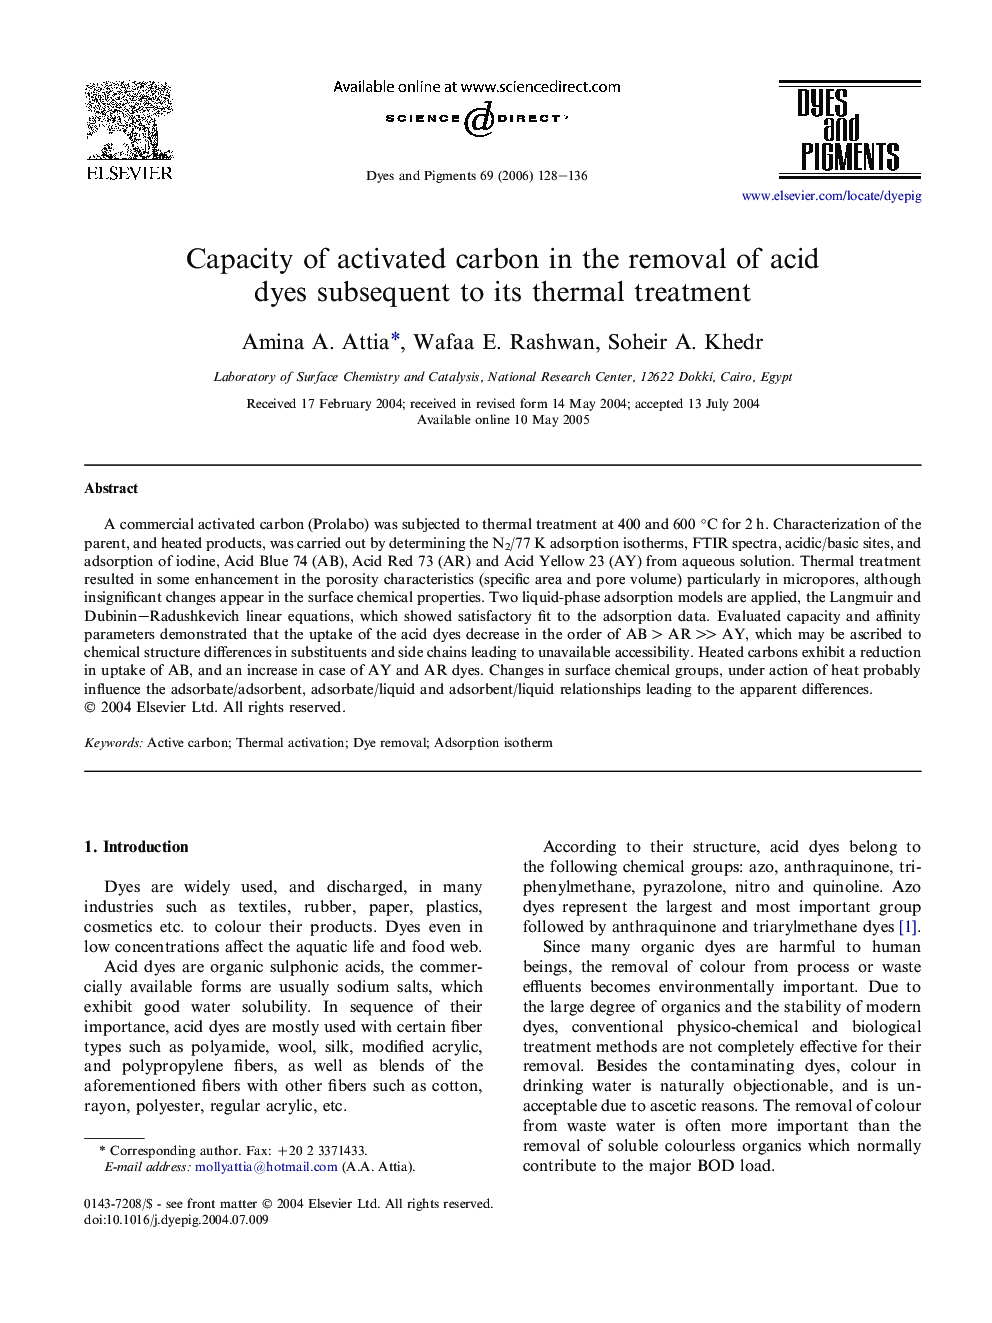 Capacity of activated carbon in the removal of acid dyes subsequent to its thermal treatment